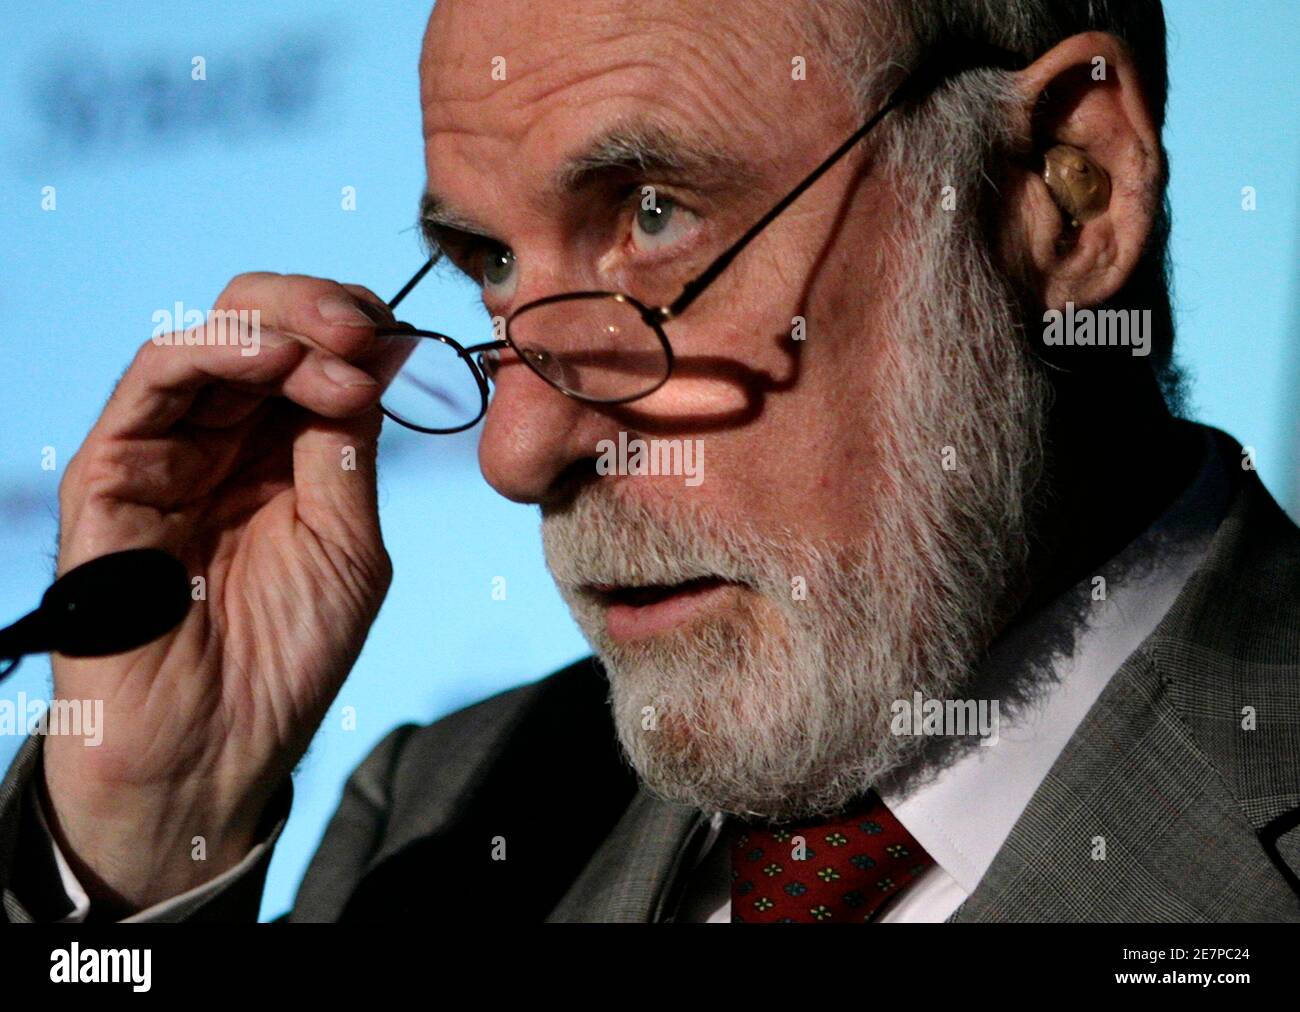 Google Vice President and Chief Internet Evangelist Vinton Cerf speaks about the power of technology to transform the government at the Tech America's annual 'Technology for Government' Conference in Washington June 10, 2009. REUTERS/Yuri Gripas (UNITED STATES POLITICS BUSINESS HEADSHOT SCI TECH) Stock Photo